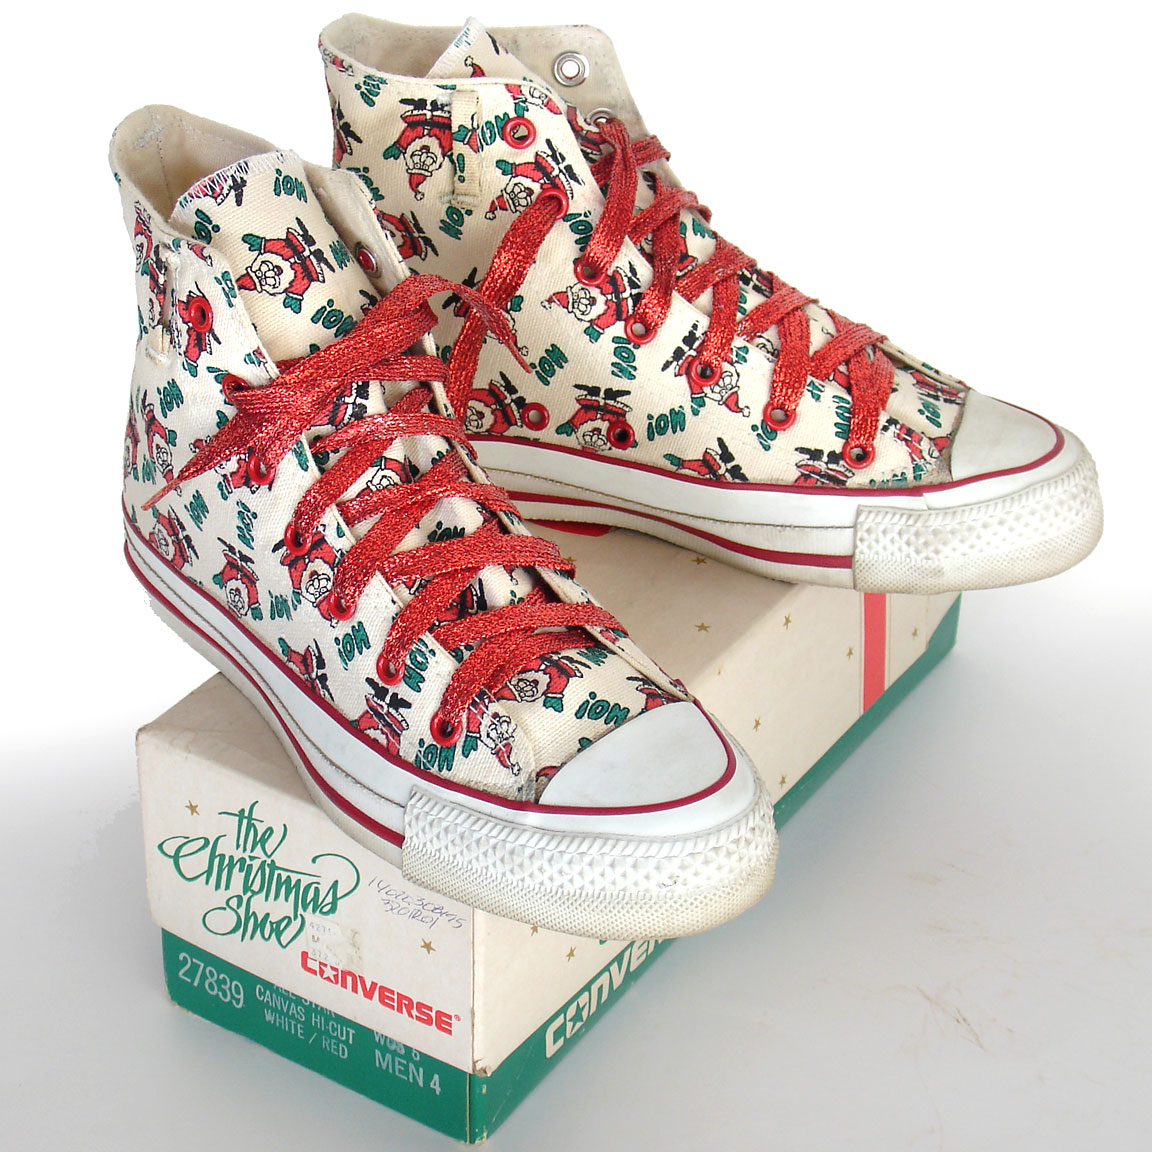 Vintage American-made Converse All Star Chuck Taylor Christmas shoes for sale at http://www.collectornet.net/shoes